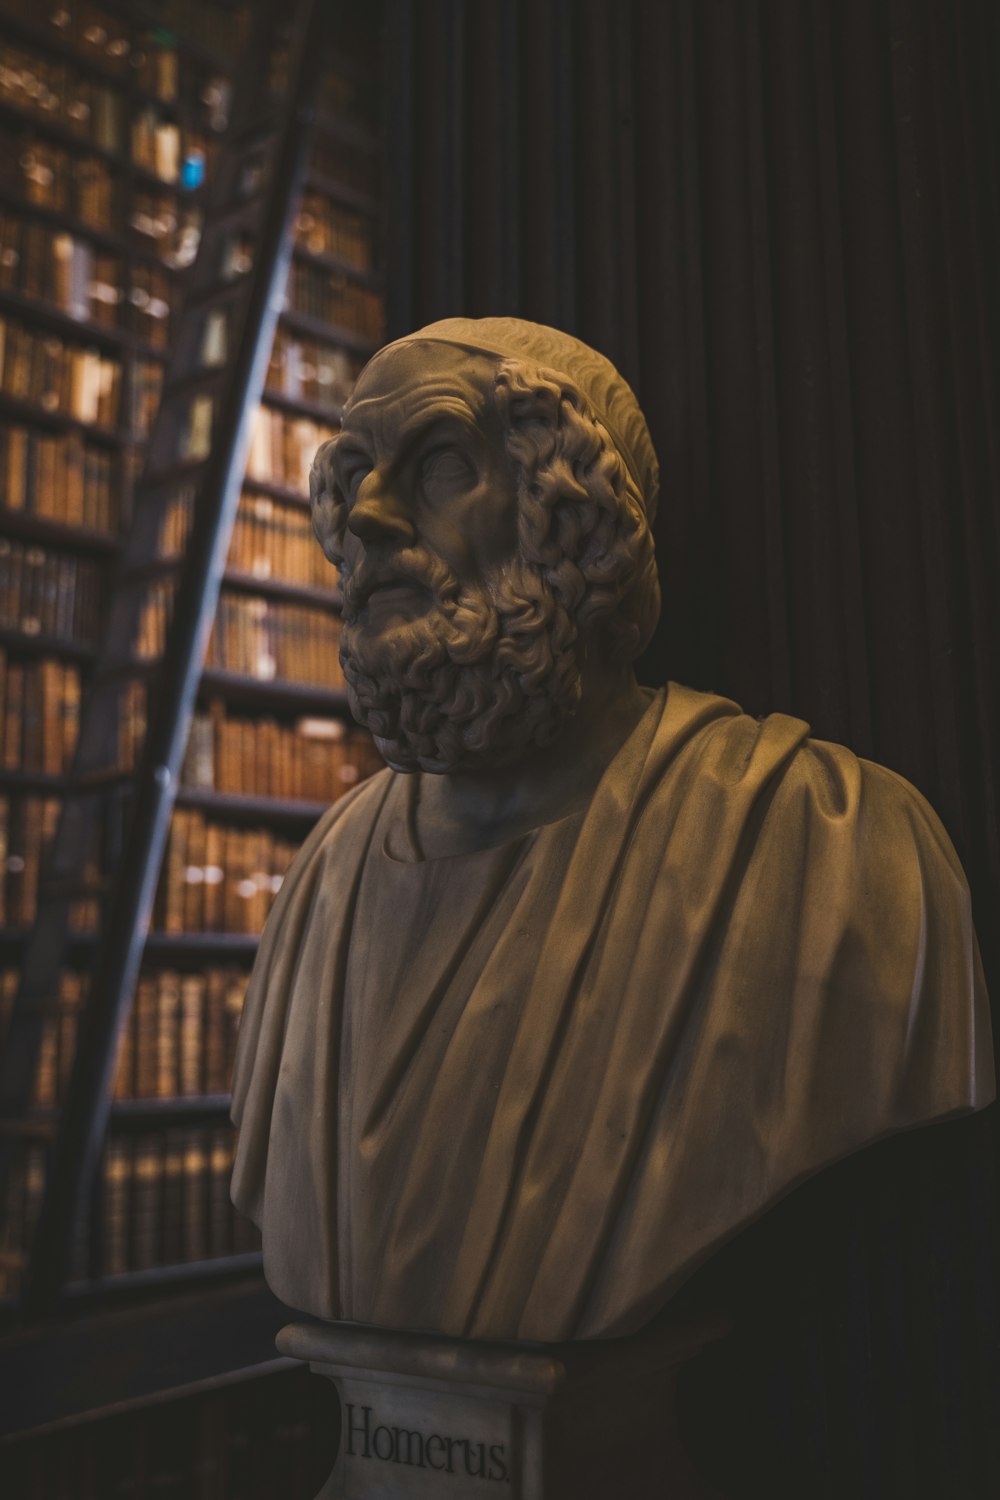 a statue of a man with a beard in front of a bookshelf